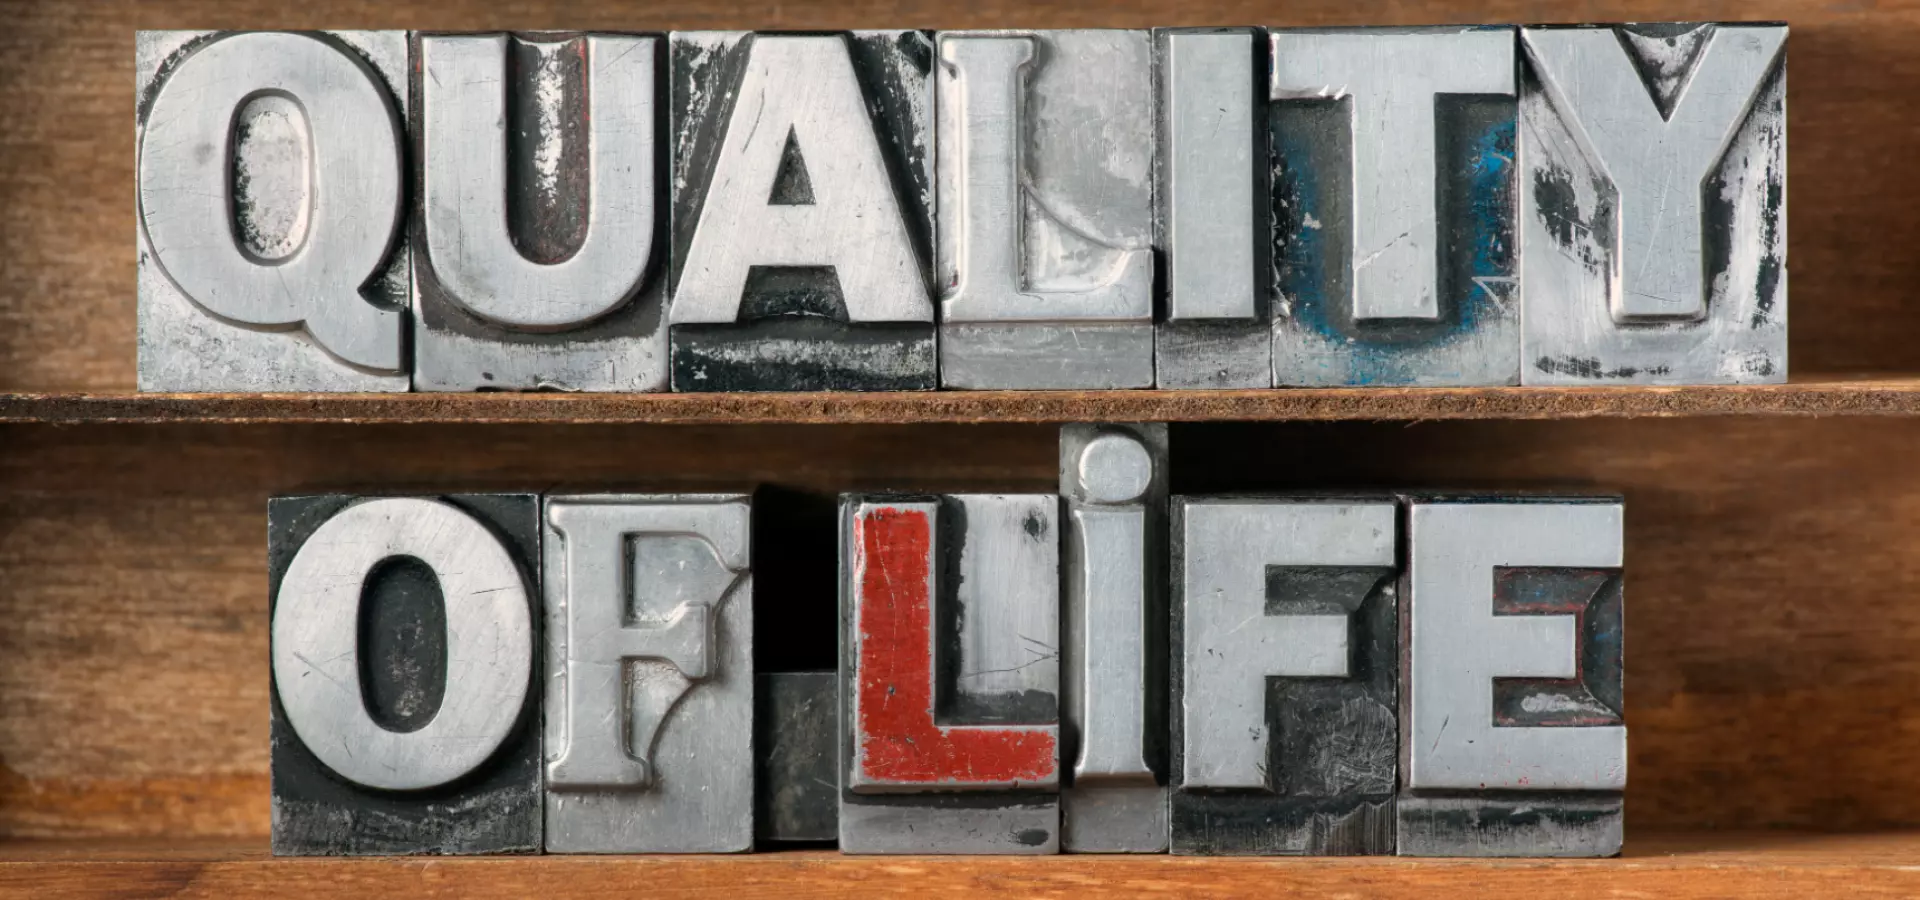 Metallic letterpress letters spelling the words 'Quality of life' on a wooden background.